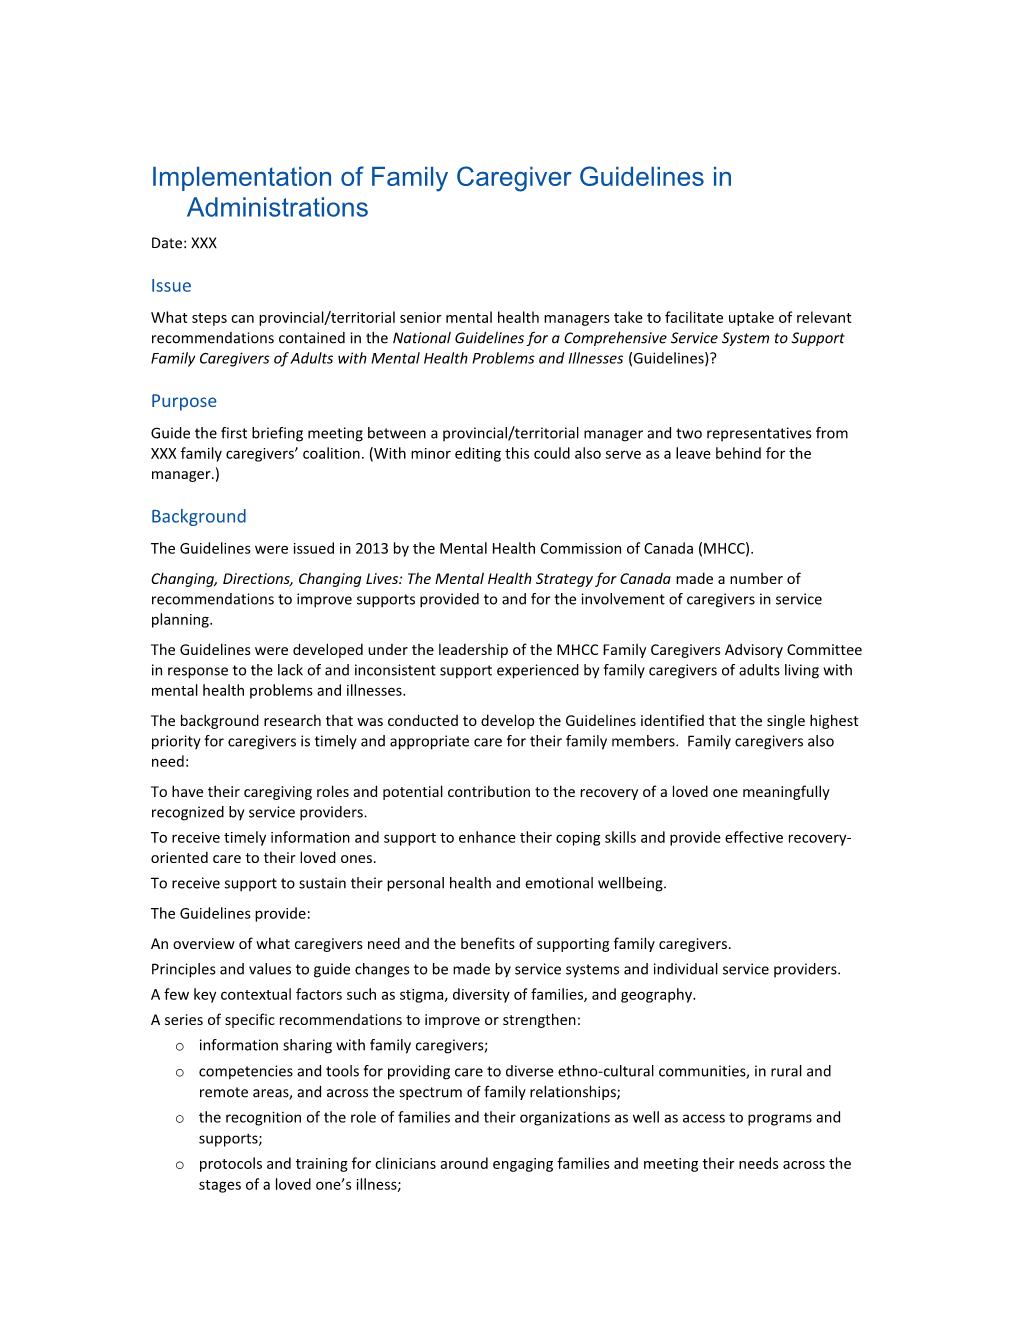 Sample Summary Document on the Caregiver Guidelines